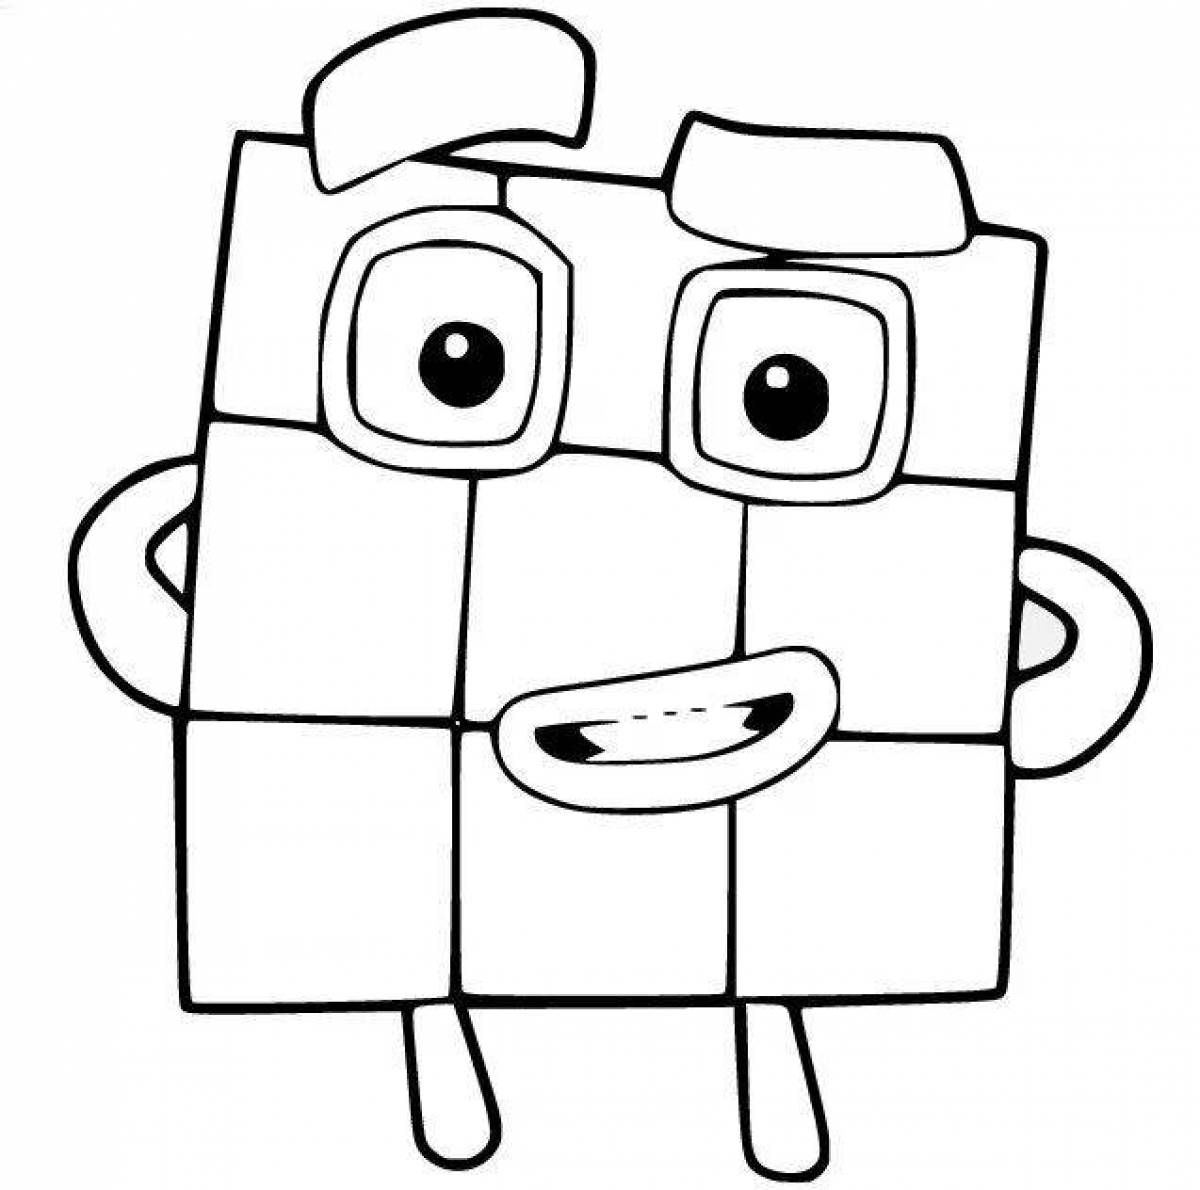 Color dream number block coloring page